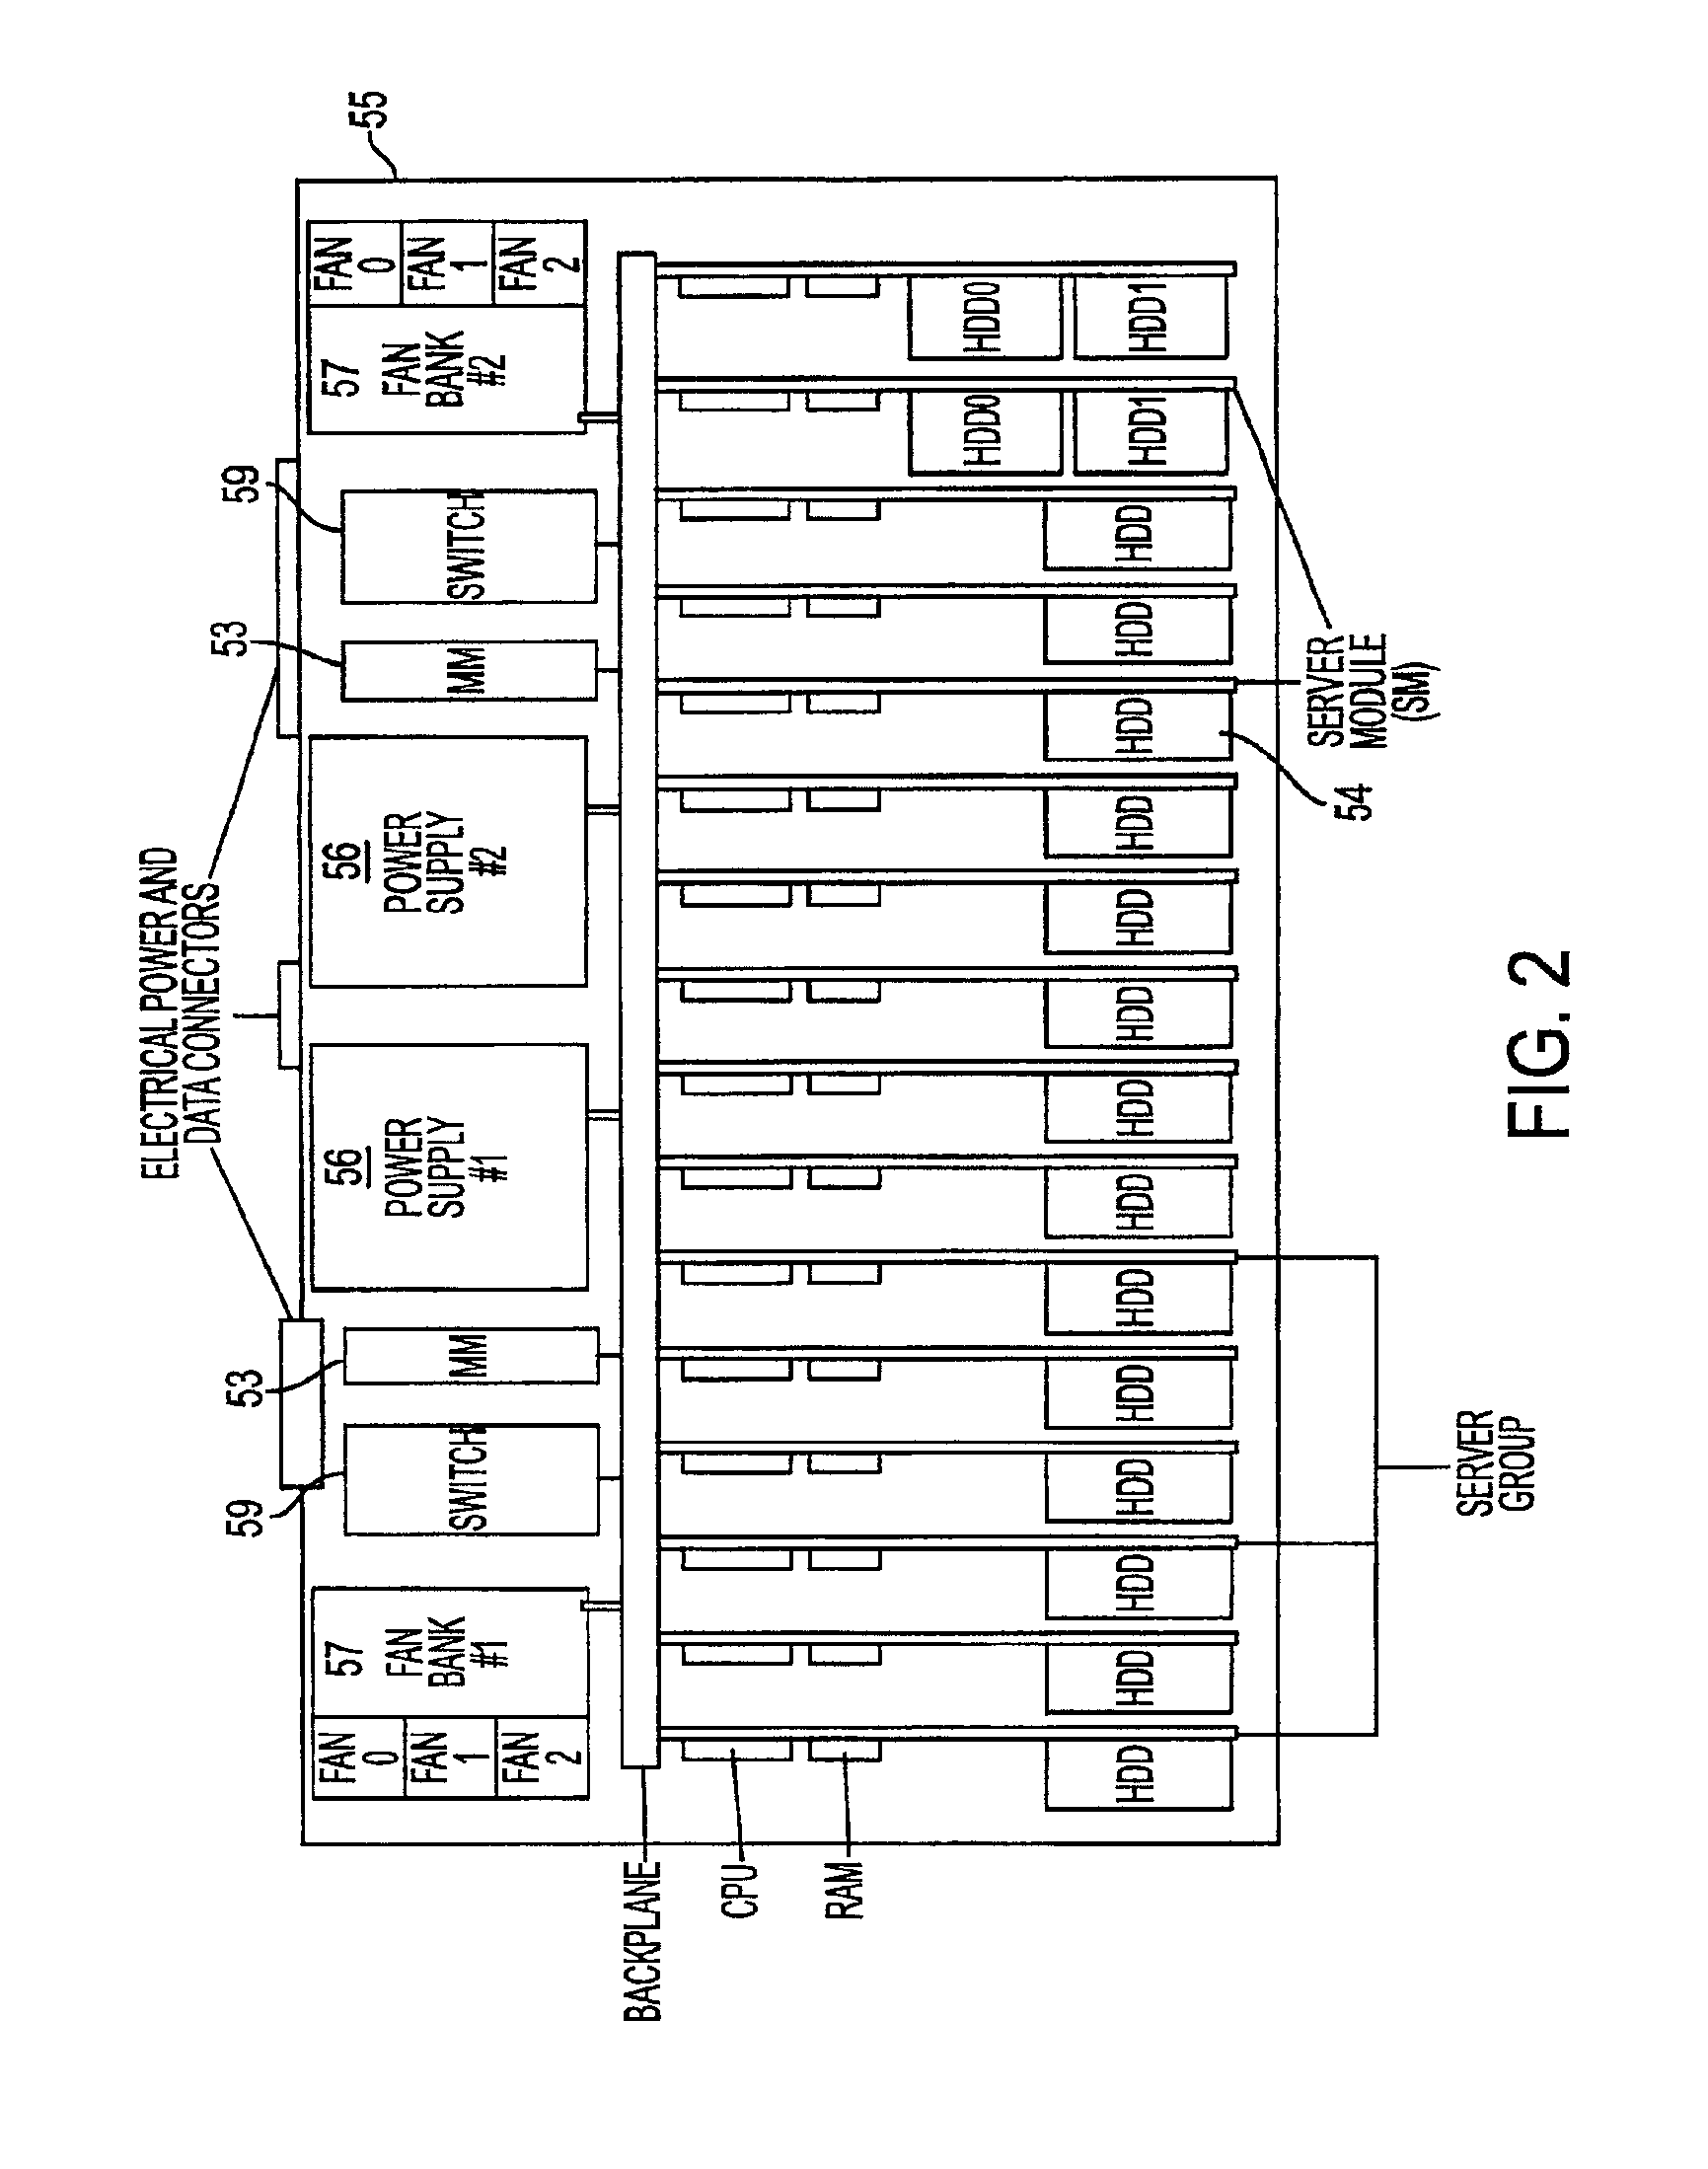 System, method, and architecture for dynamic server power management and dynamic workload management for multi-server environment